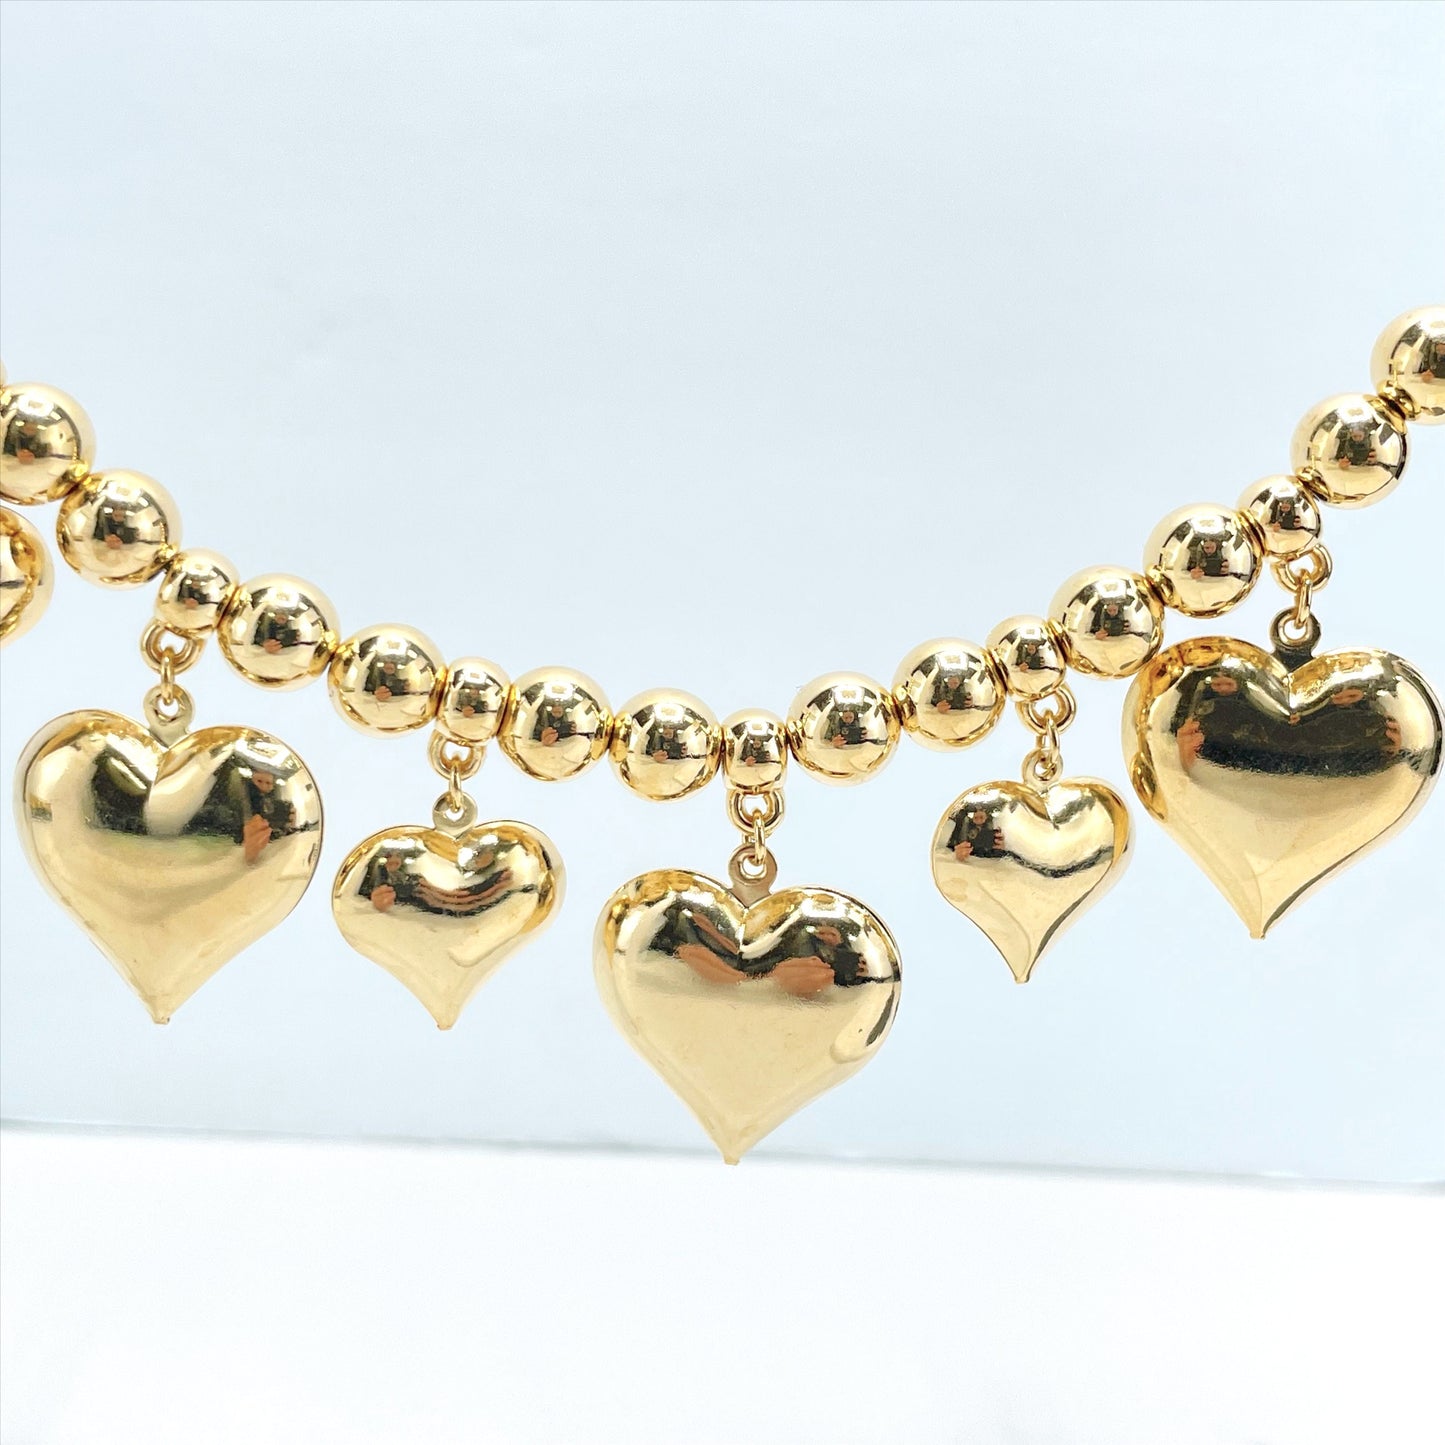 18k Gold Filled 1mm Snake Chain with Gold Beads and Heart Charms Bracelet, Vintage and Romantic Jewelry, Wholesale Jewelry Making Supplies